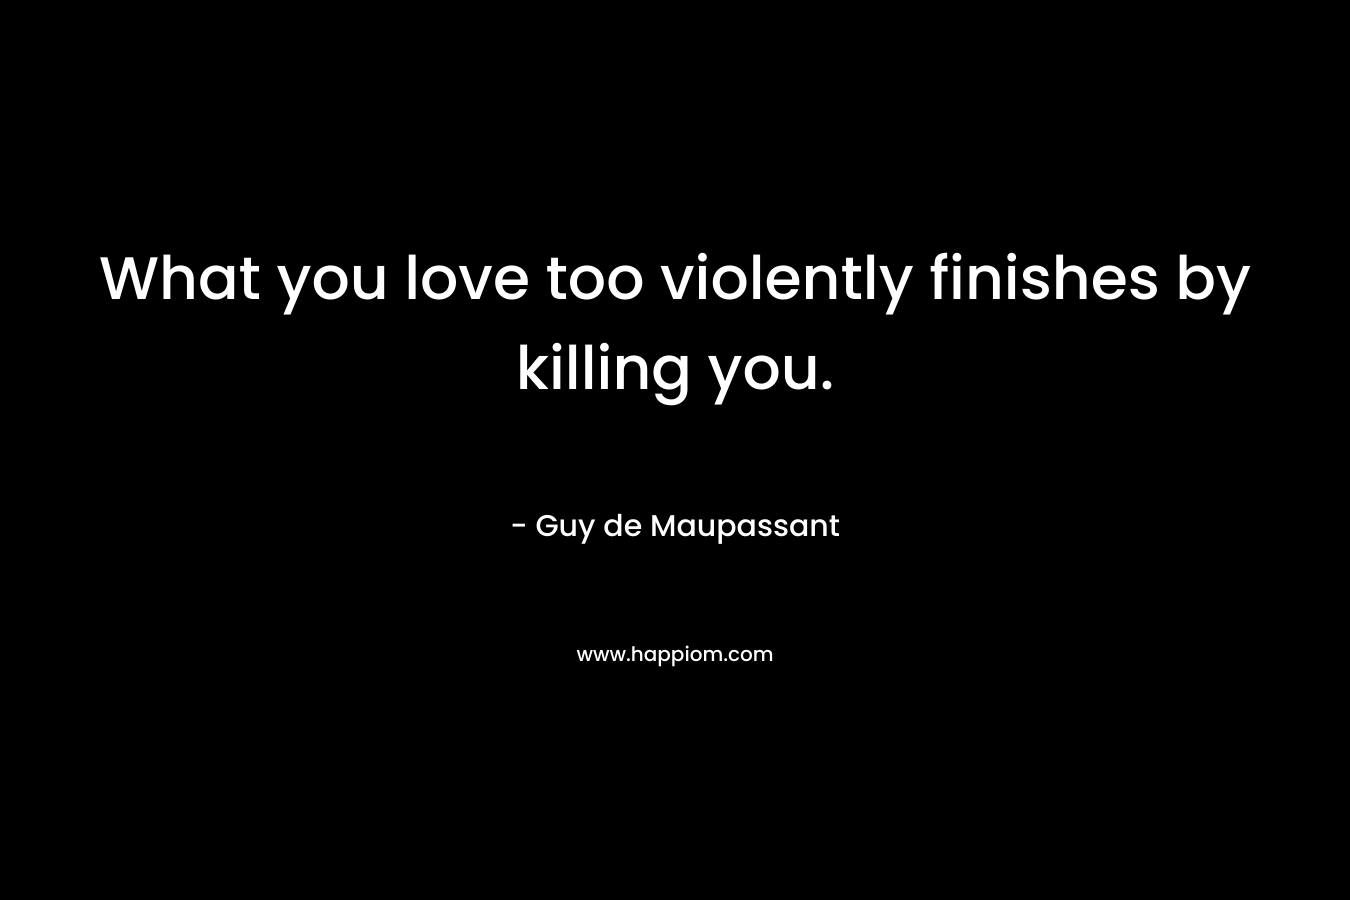 What you love too violently finishes by killing you. – Guy de Maupassant